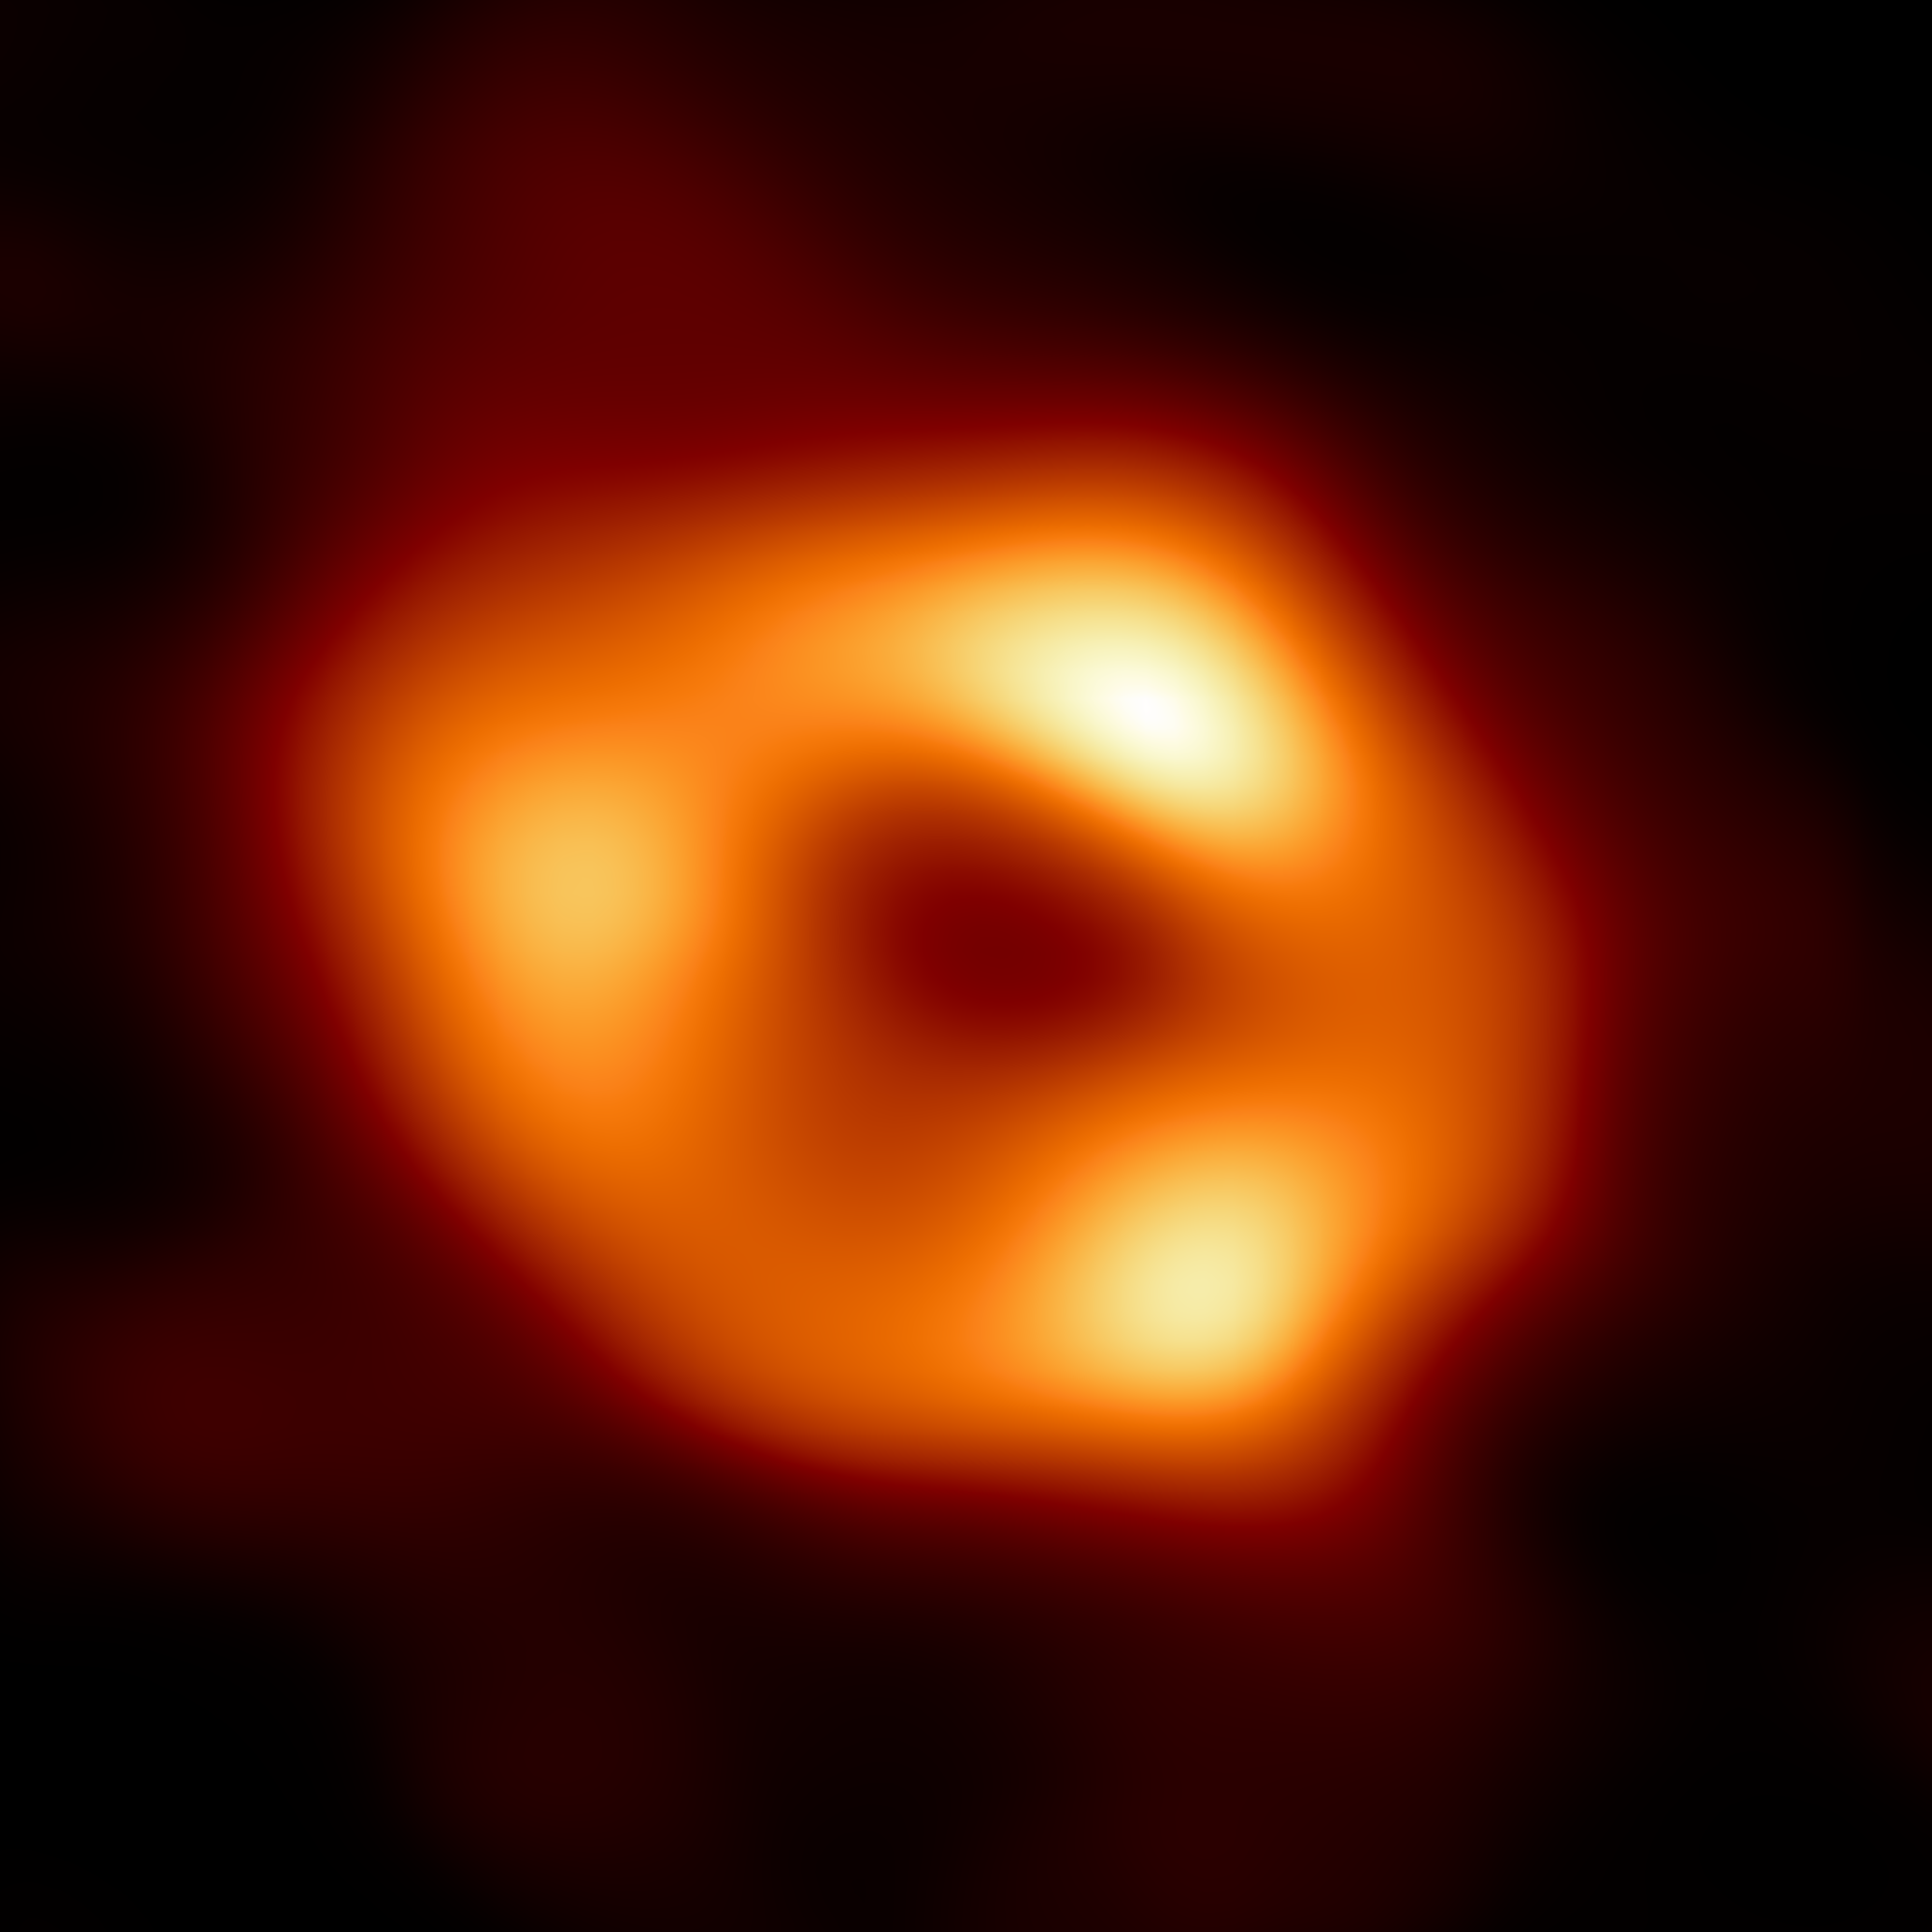 A slightly oblong donut-shaped ring of glowing warm dust especially bright at spots on the top, left, and right surrounds a black hole.